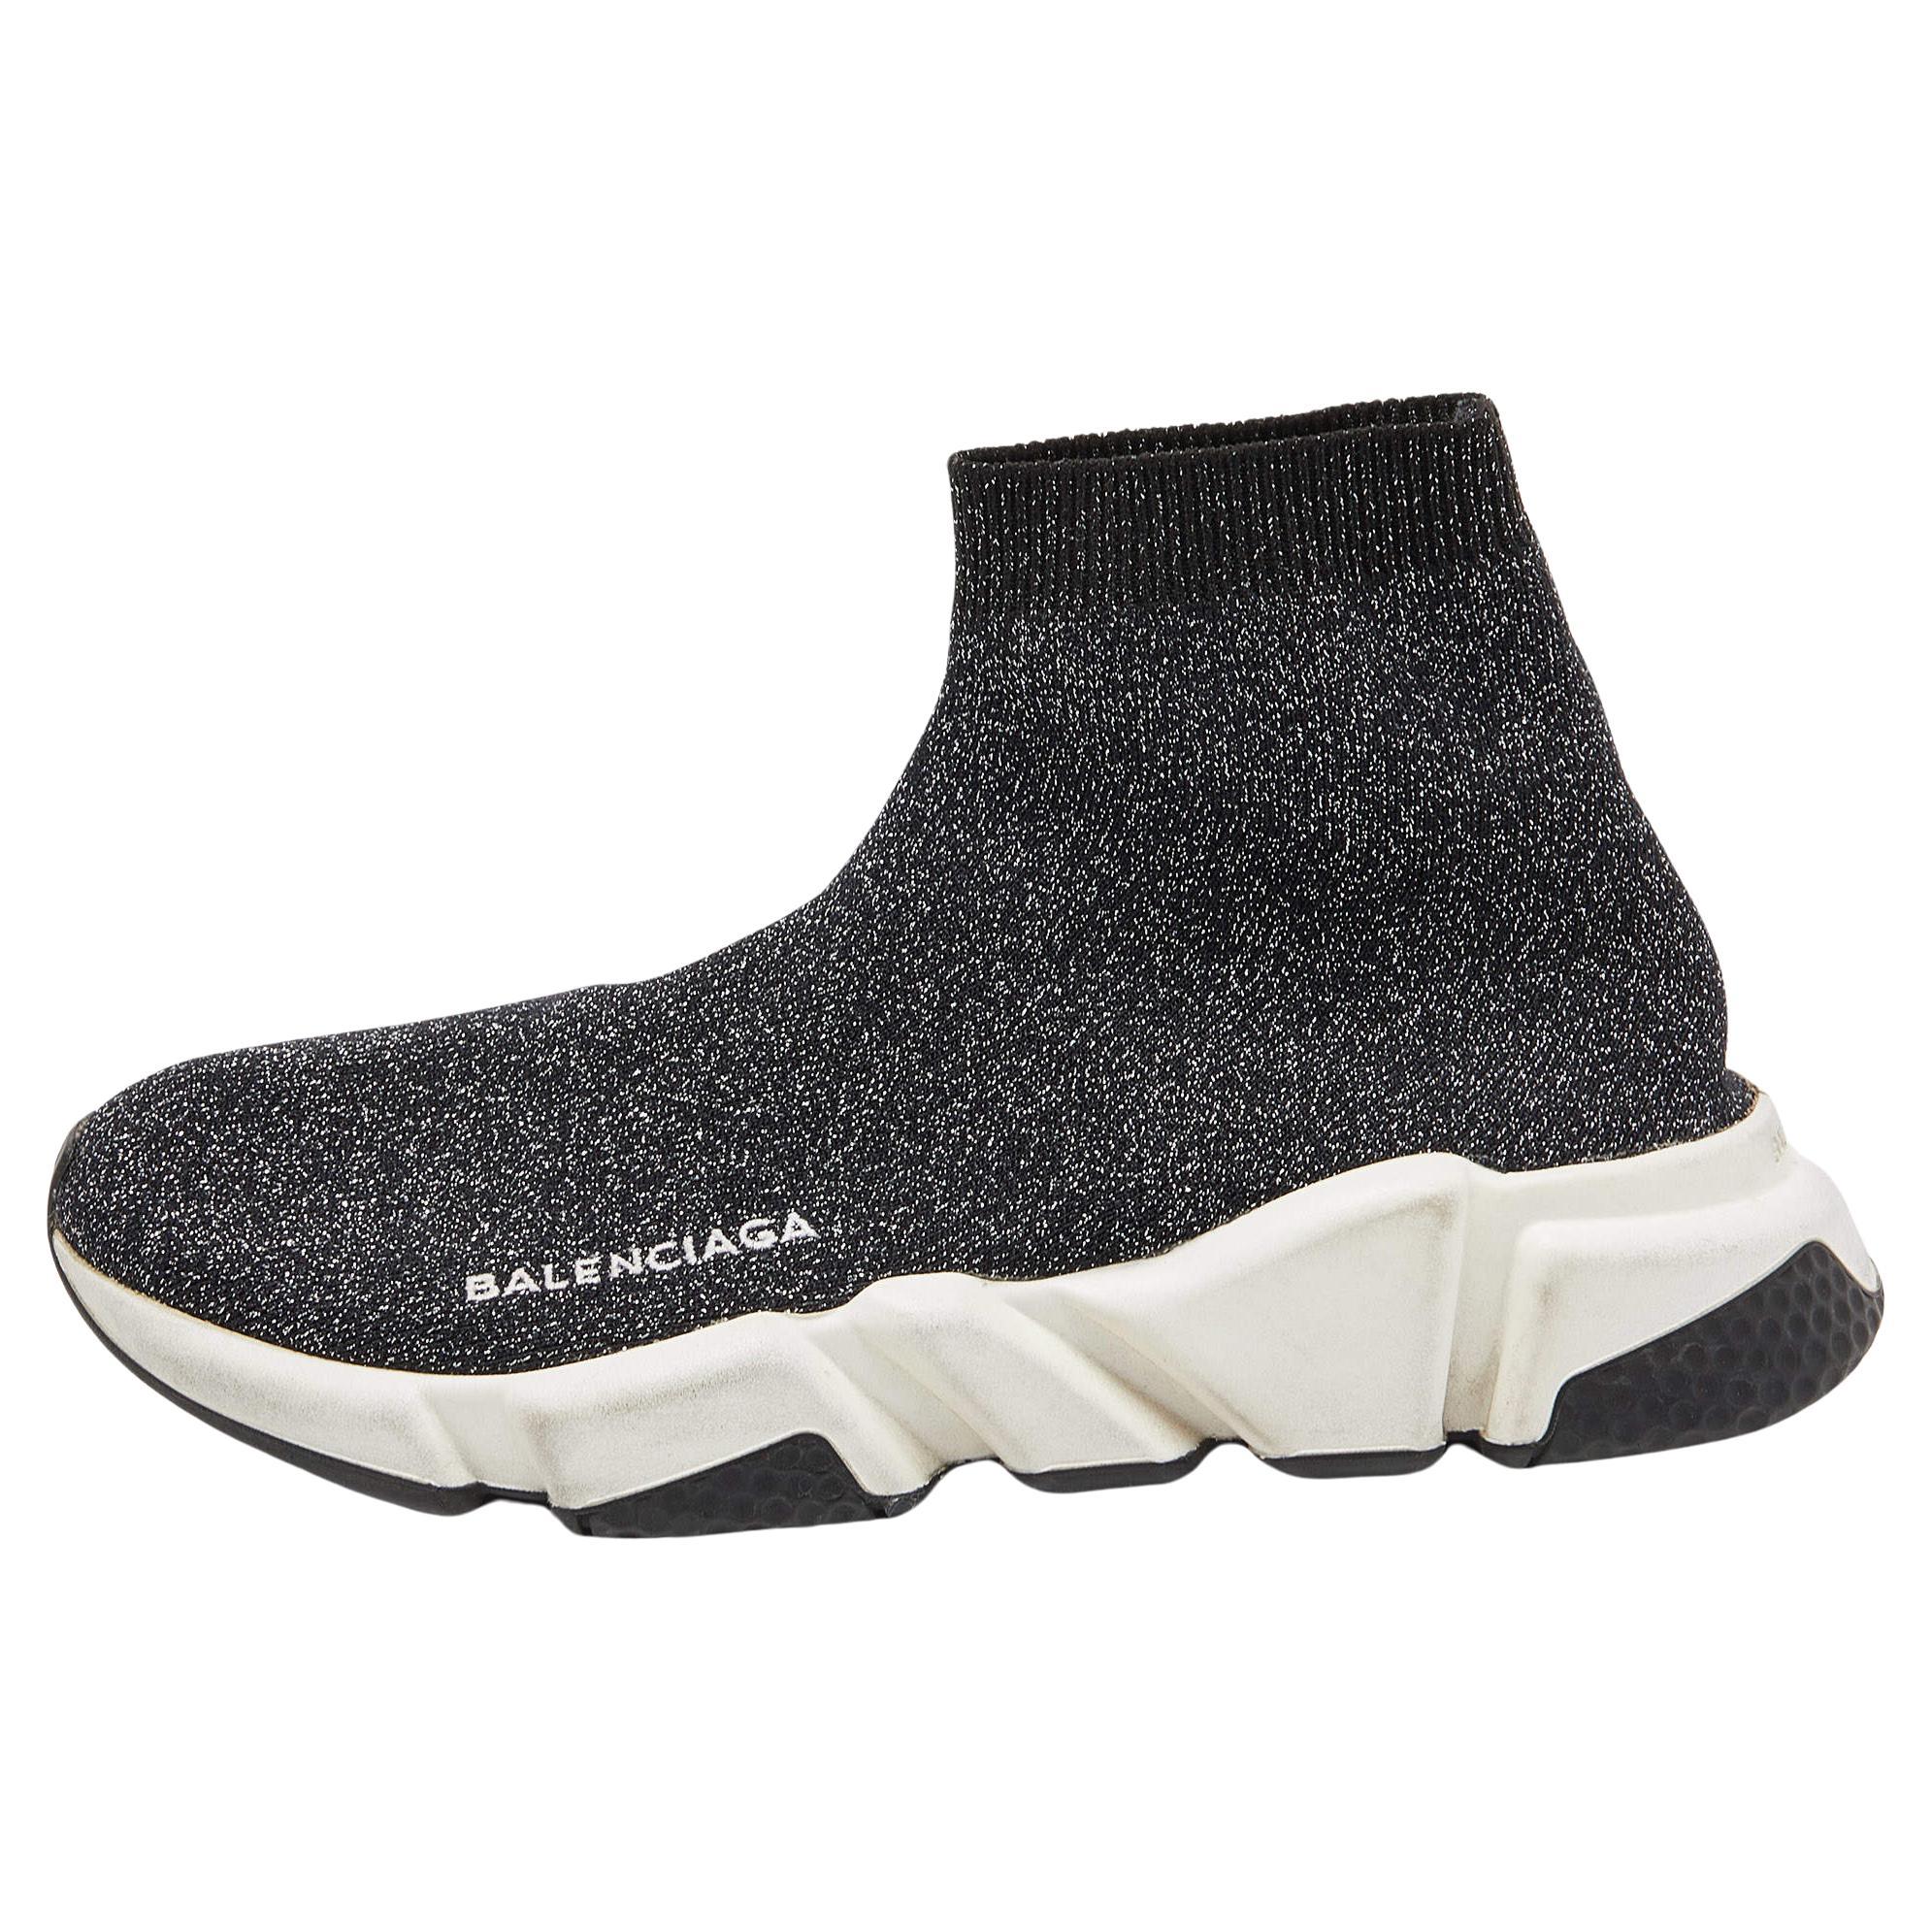 Balenciaga Shimmery Black Knit Fabric Speed Trainer Sneakers Size 38 For Sale